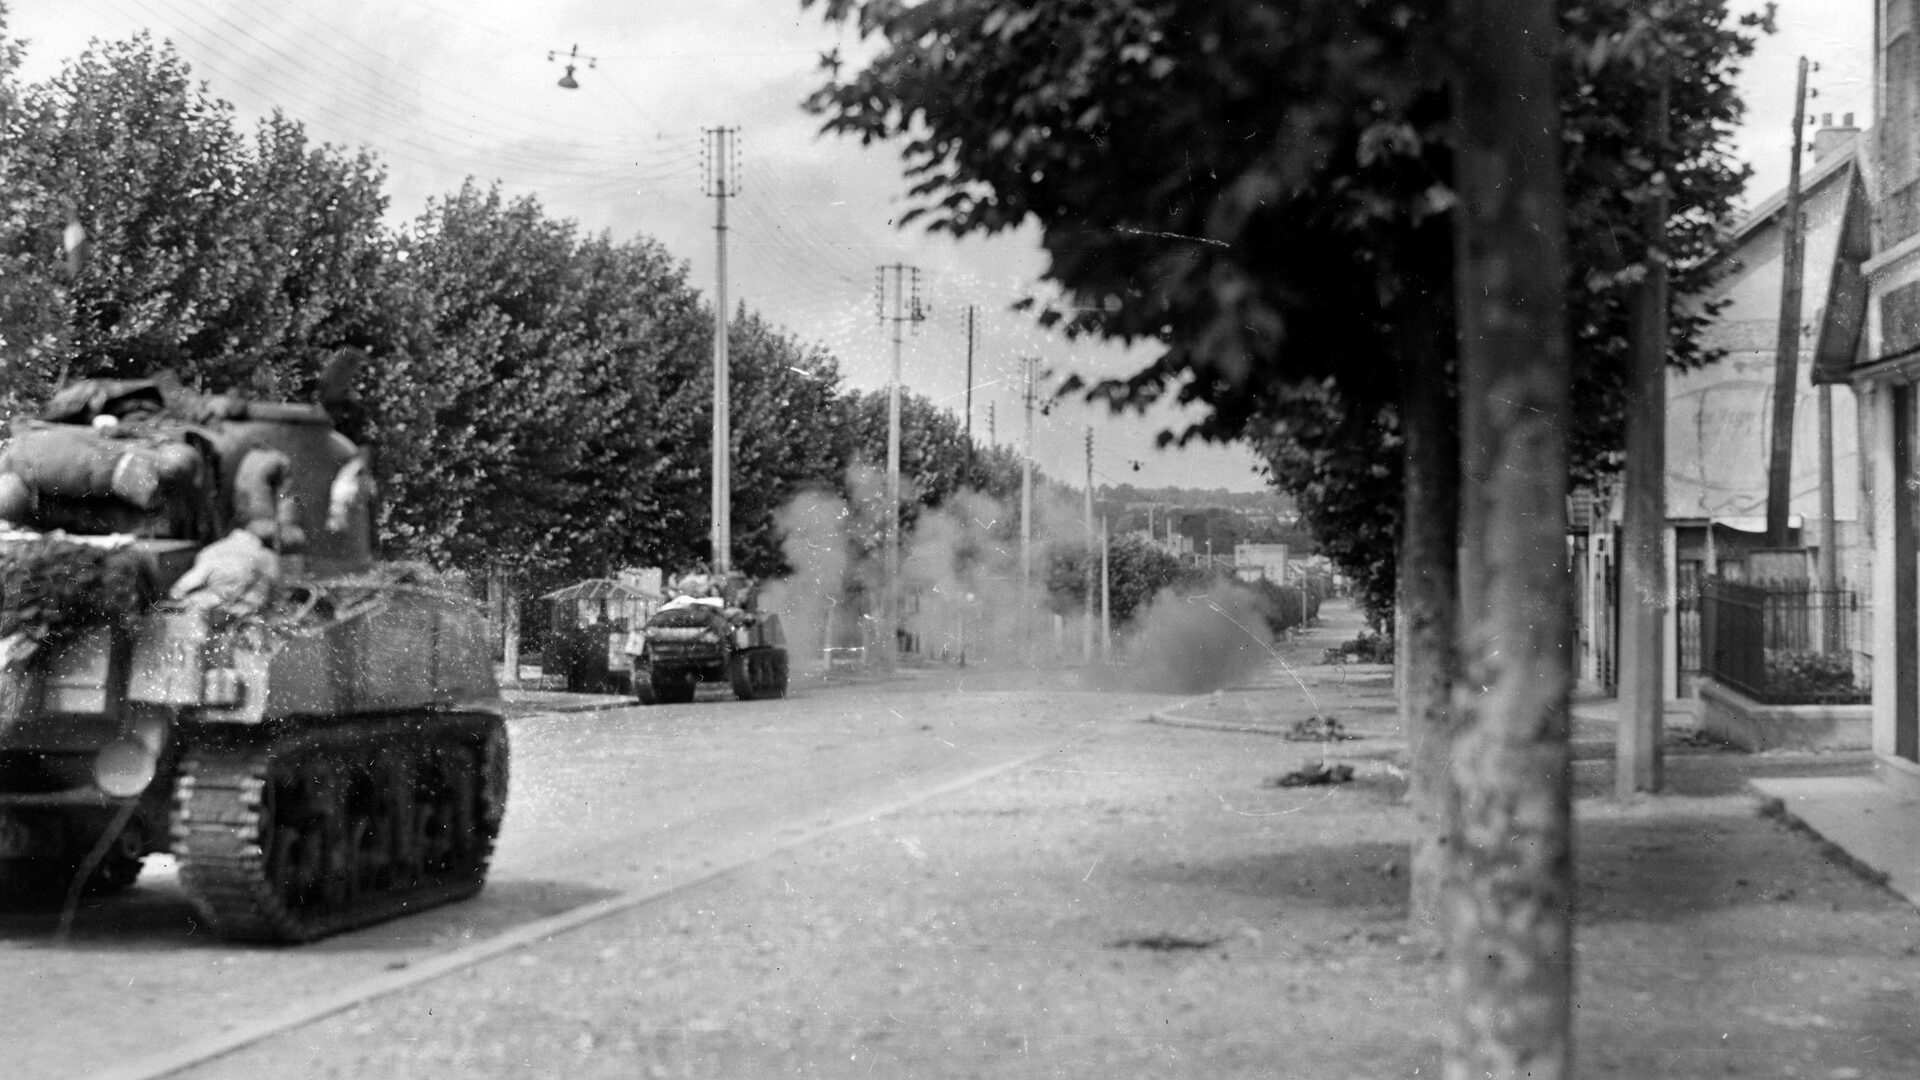 German shells fire on the tanks of the 2nd French Armored Division as they approach Paris on August 25, 1944.